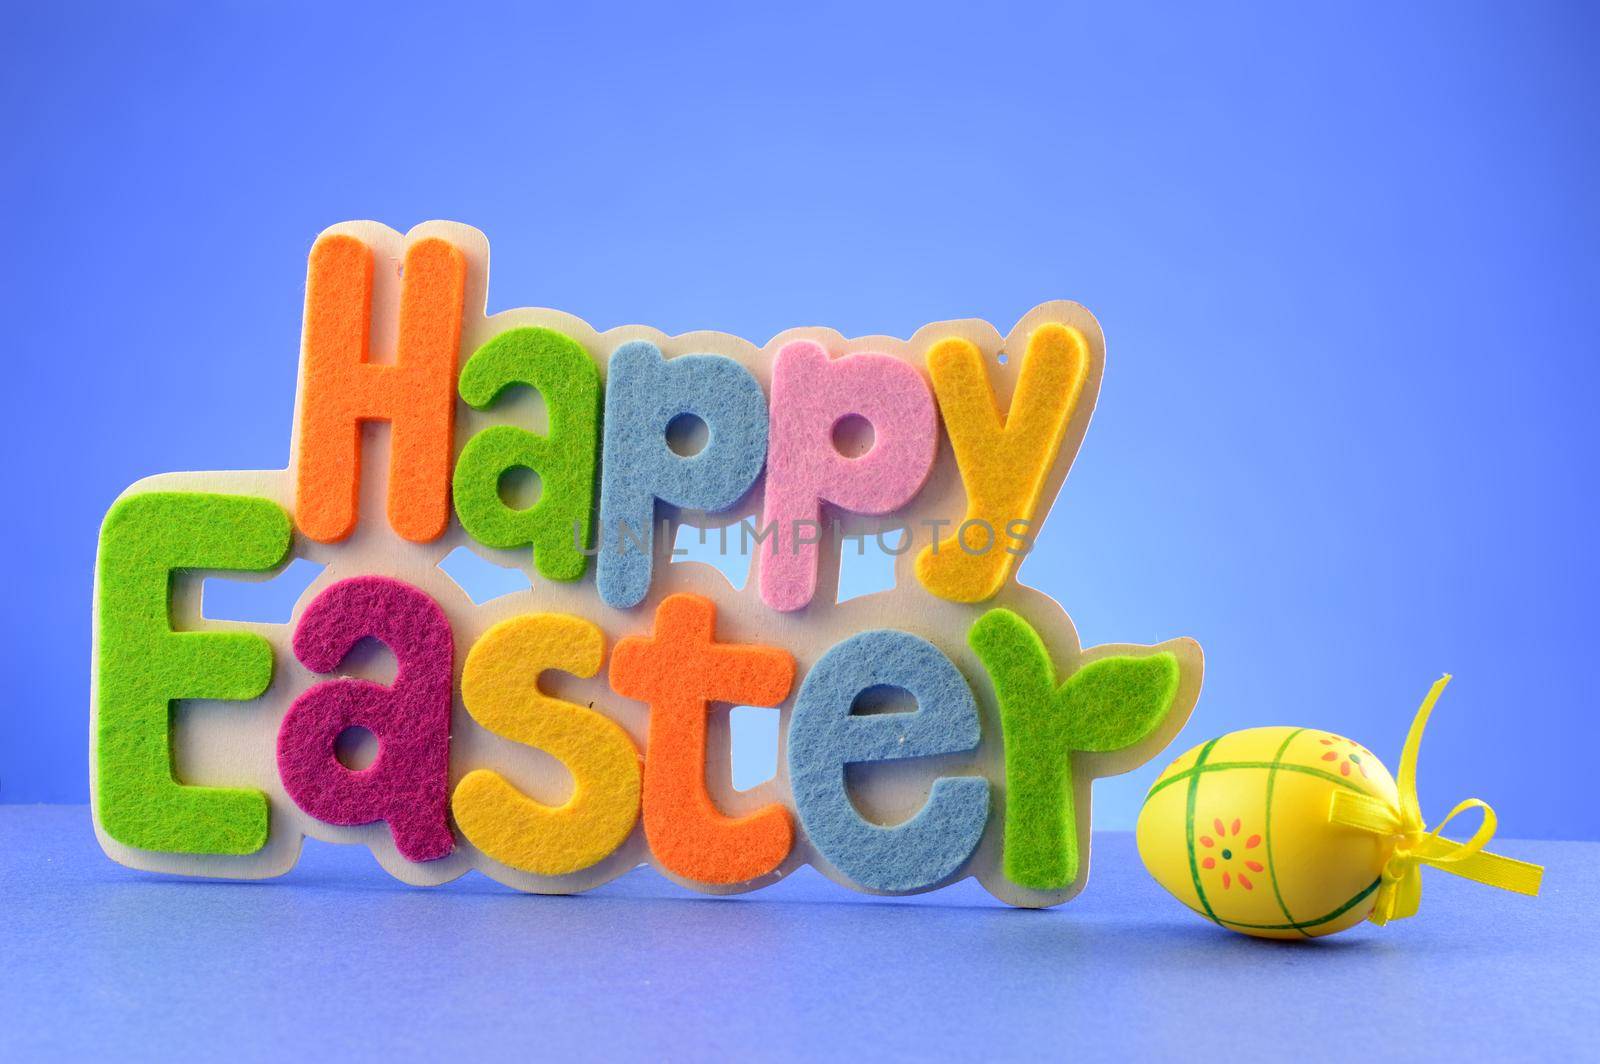 A festive sign for the holiday season that says Happy Easter over a blue background.